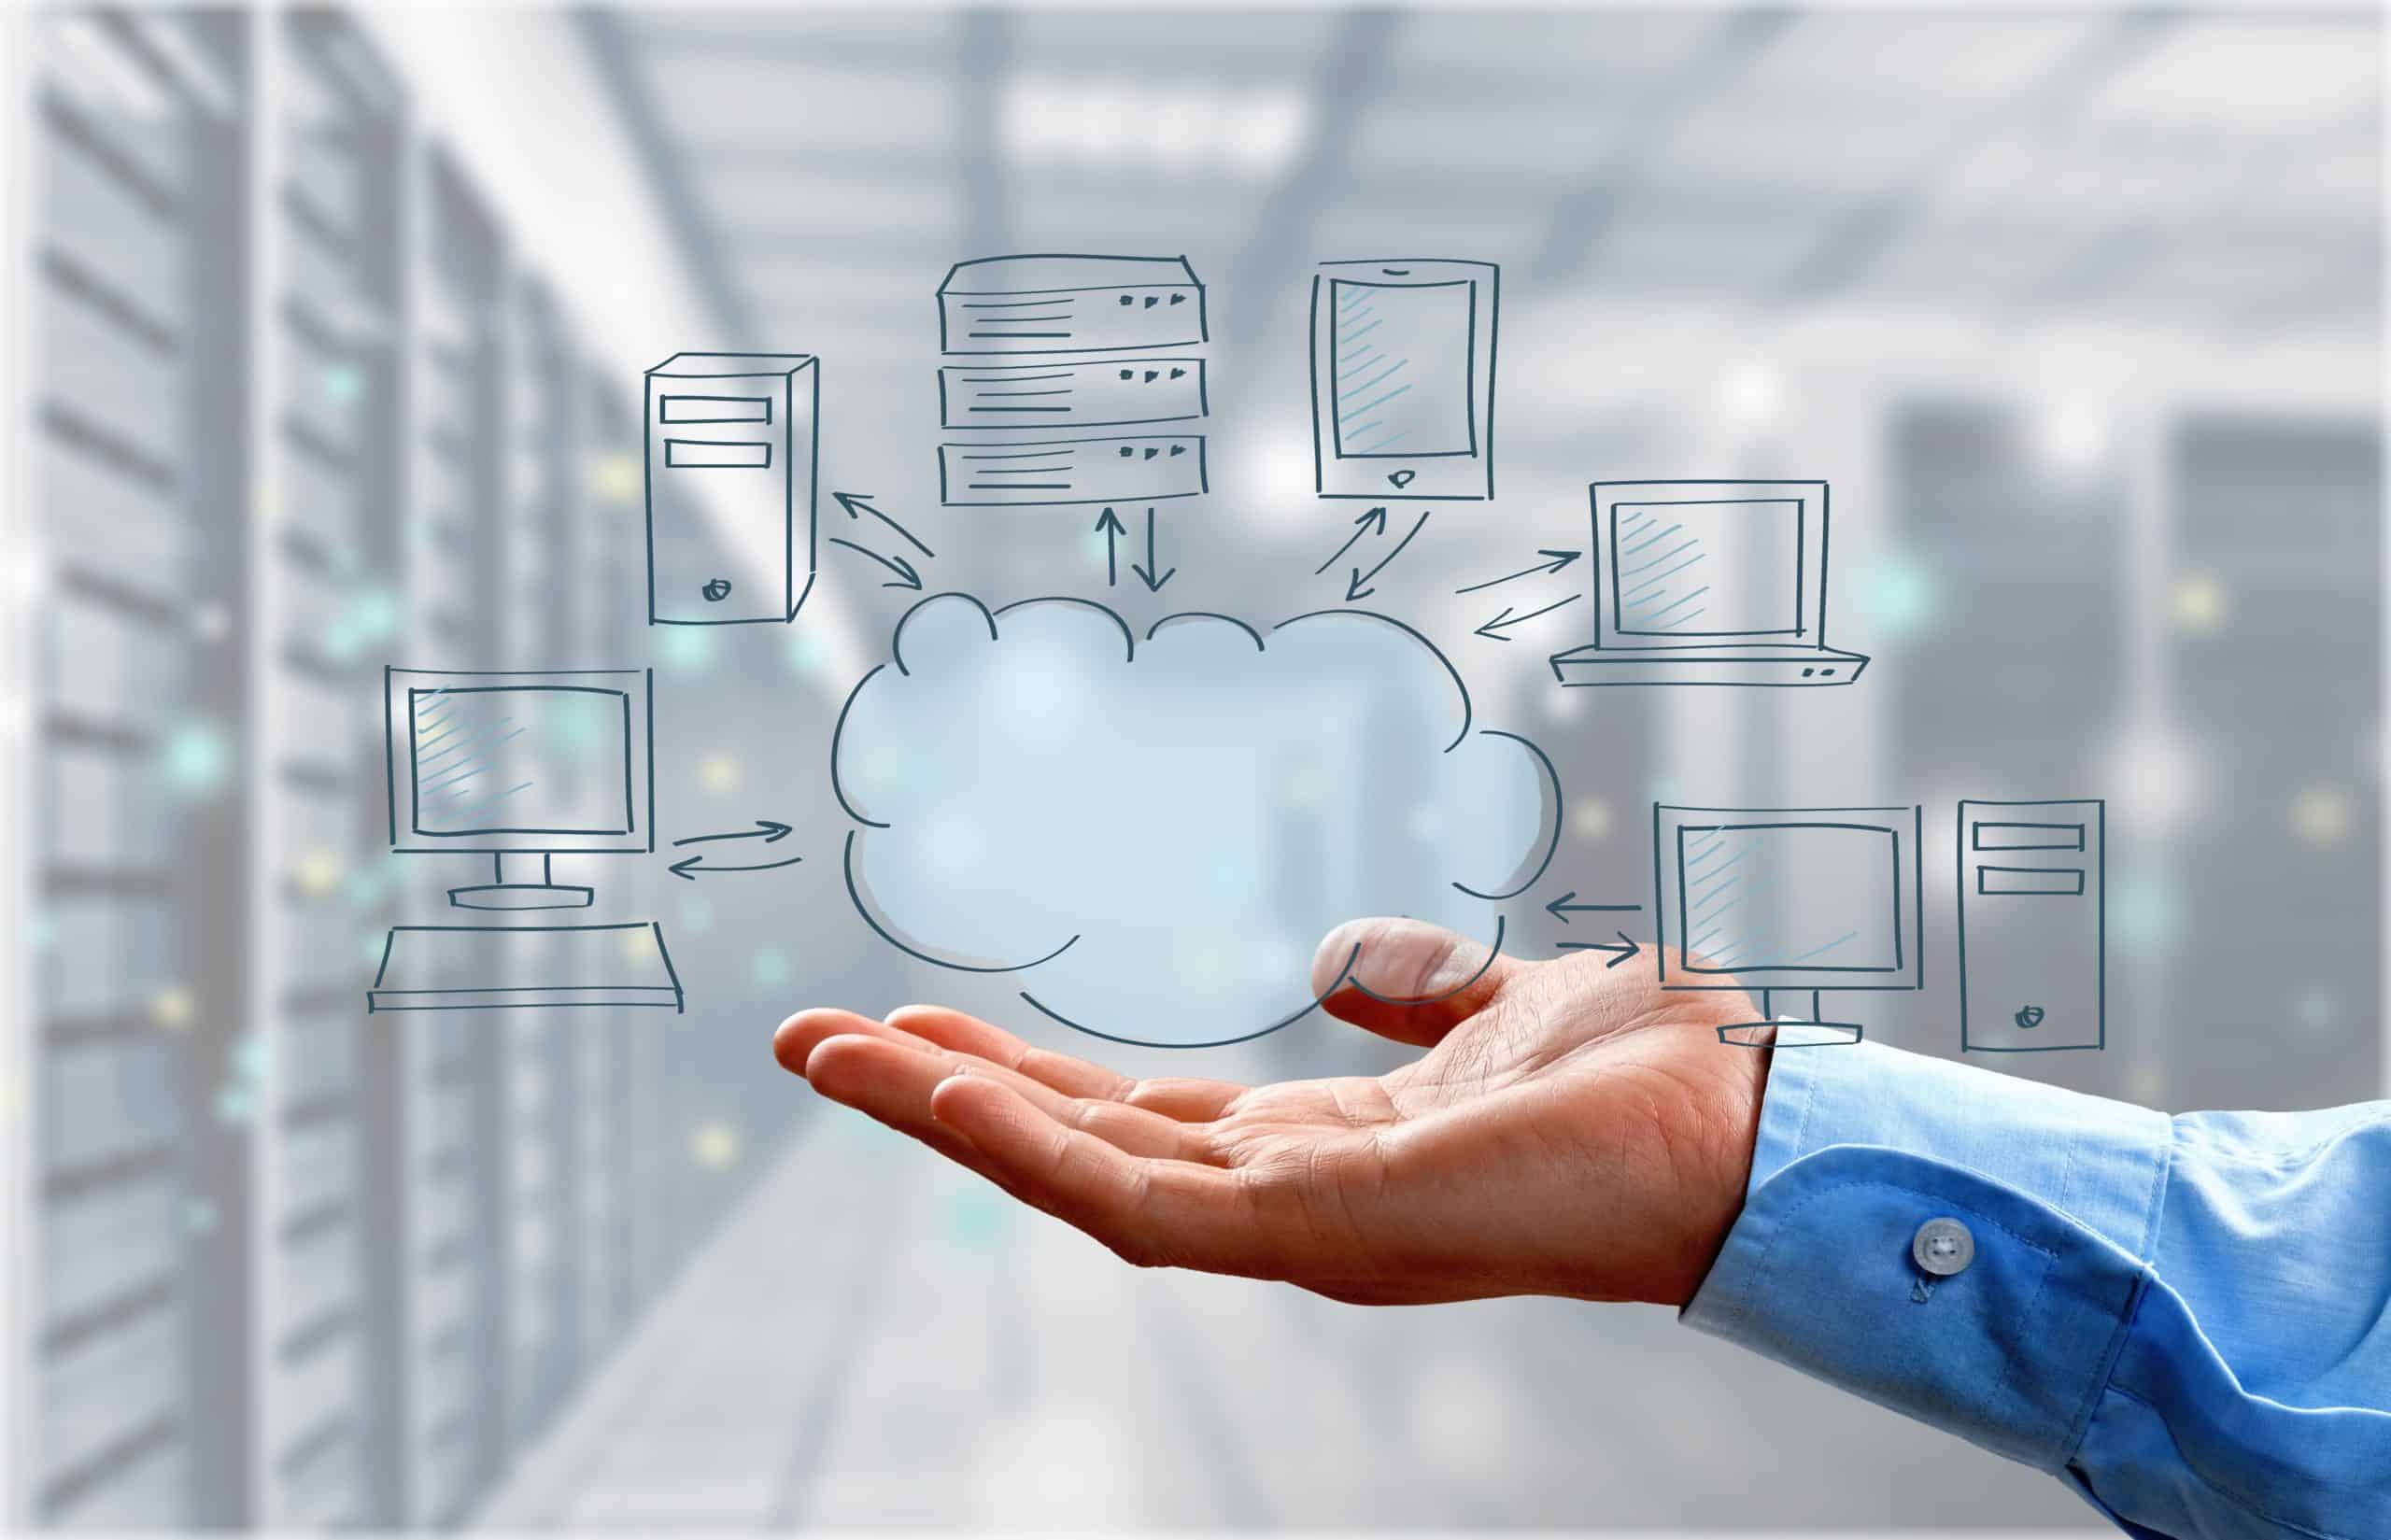 Devices and services connected to the cloud